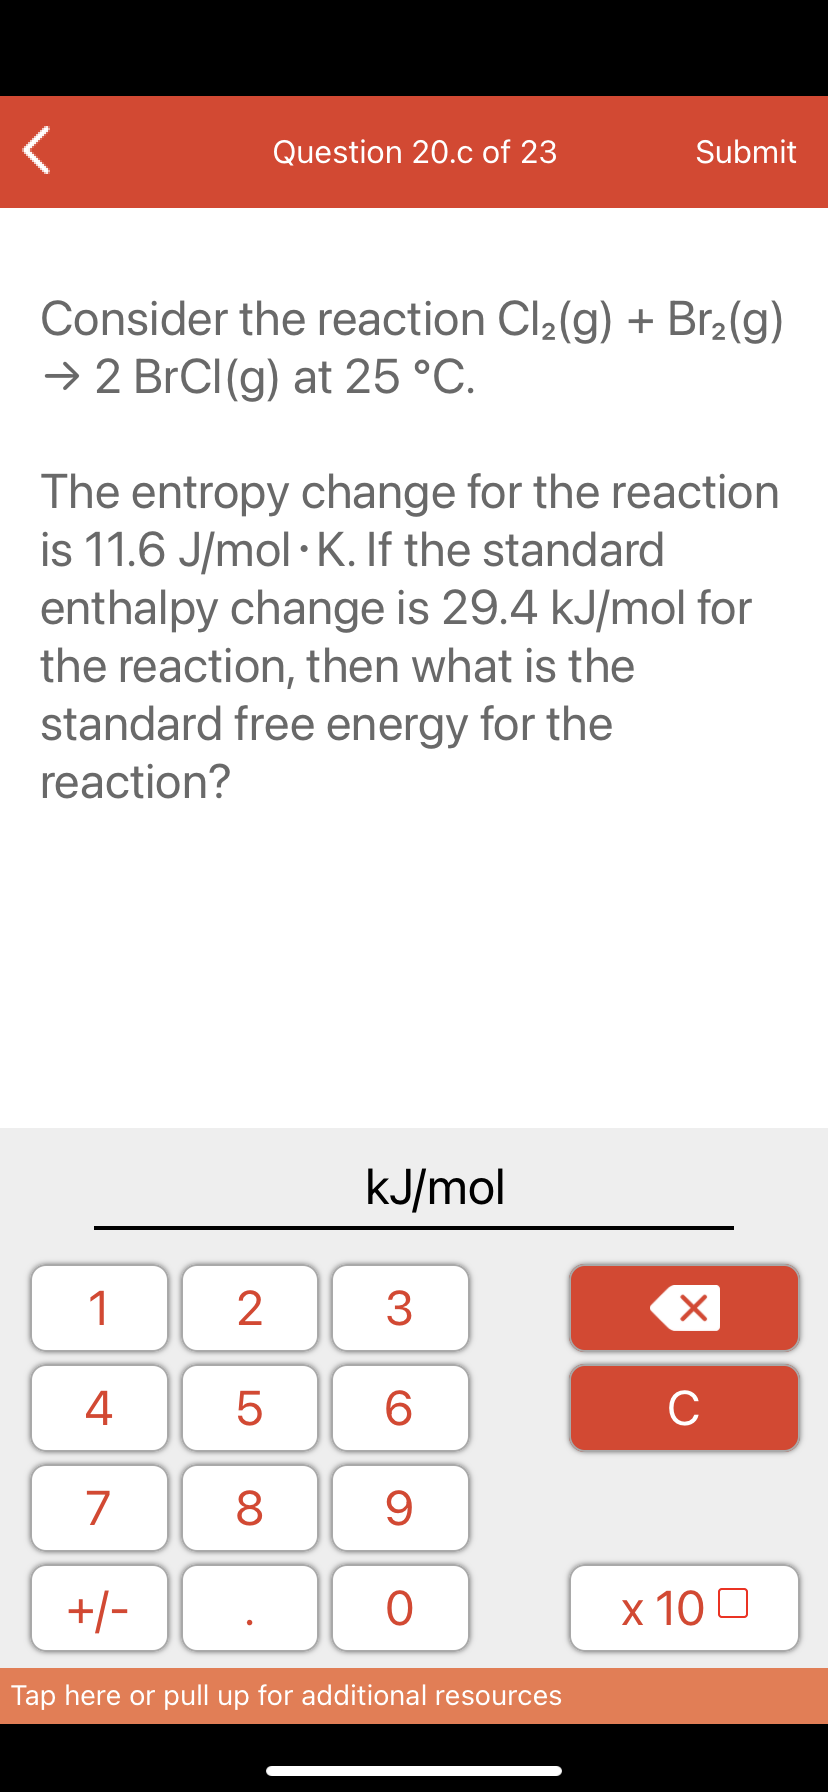 Question 20.c of 23
Submit
Consider the reaction Cl2(g) + Br2(g)
→ 2 BrCI(g) at 25 °C.
The entropy change for the reaction
is 11.6 J/mol · K. If the standard
enthalpy change is 29.4 kJ/mol for
the reaction, then what is the
standard free energy for the
reaction?
kJ/mol
1
4
6.
C
7
9
+/-
x 10 0
Tap here or pull up for additional resources
LO
00
